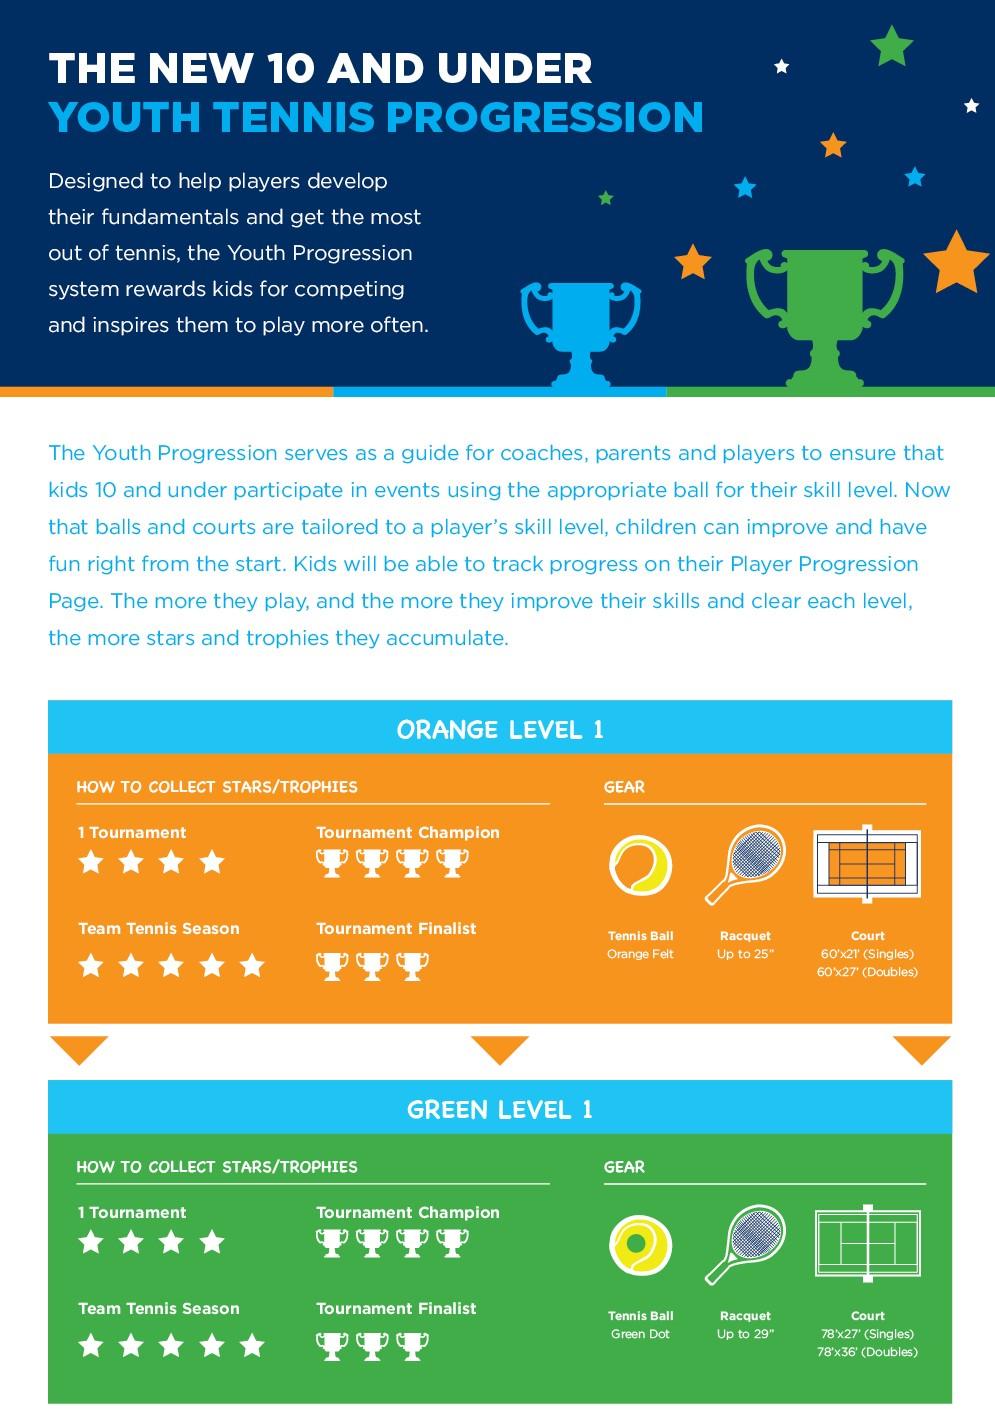 The Youth Progression Pathway will award stars and trophies for participation, instead of points.